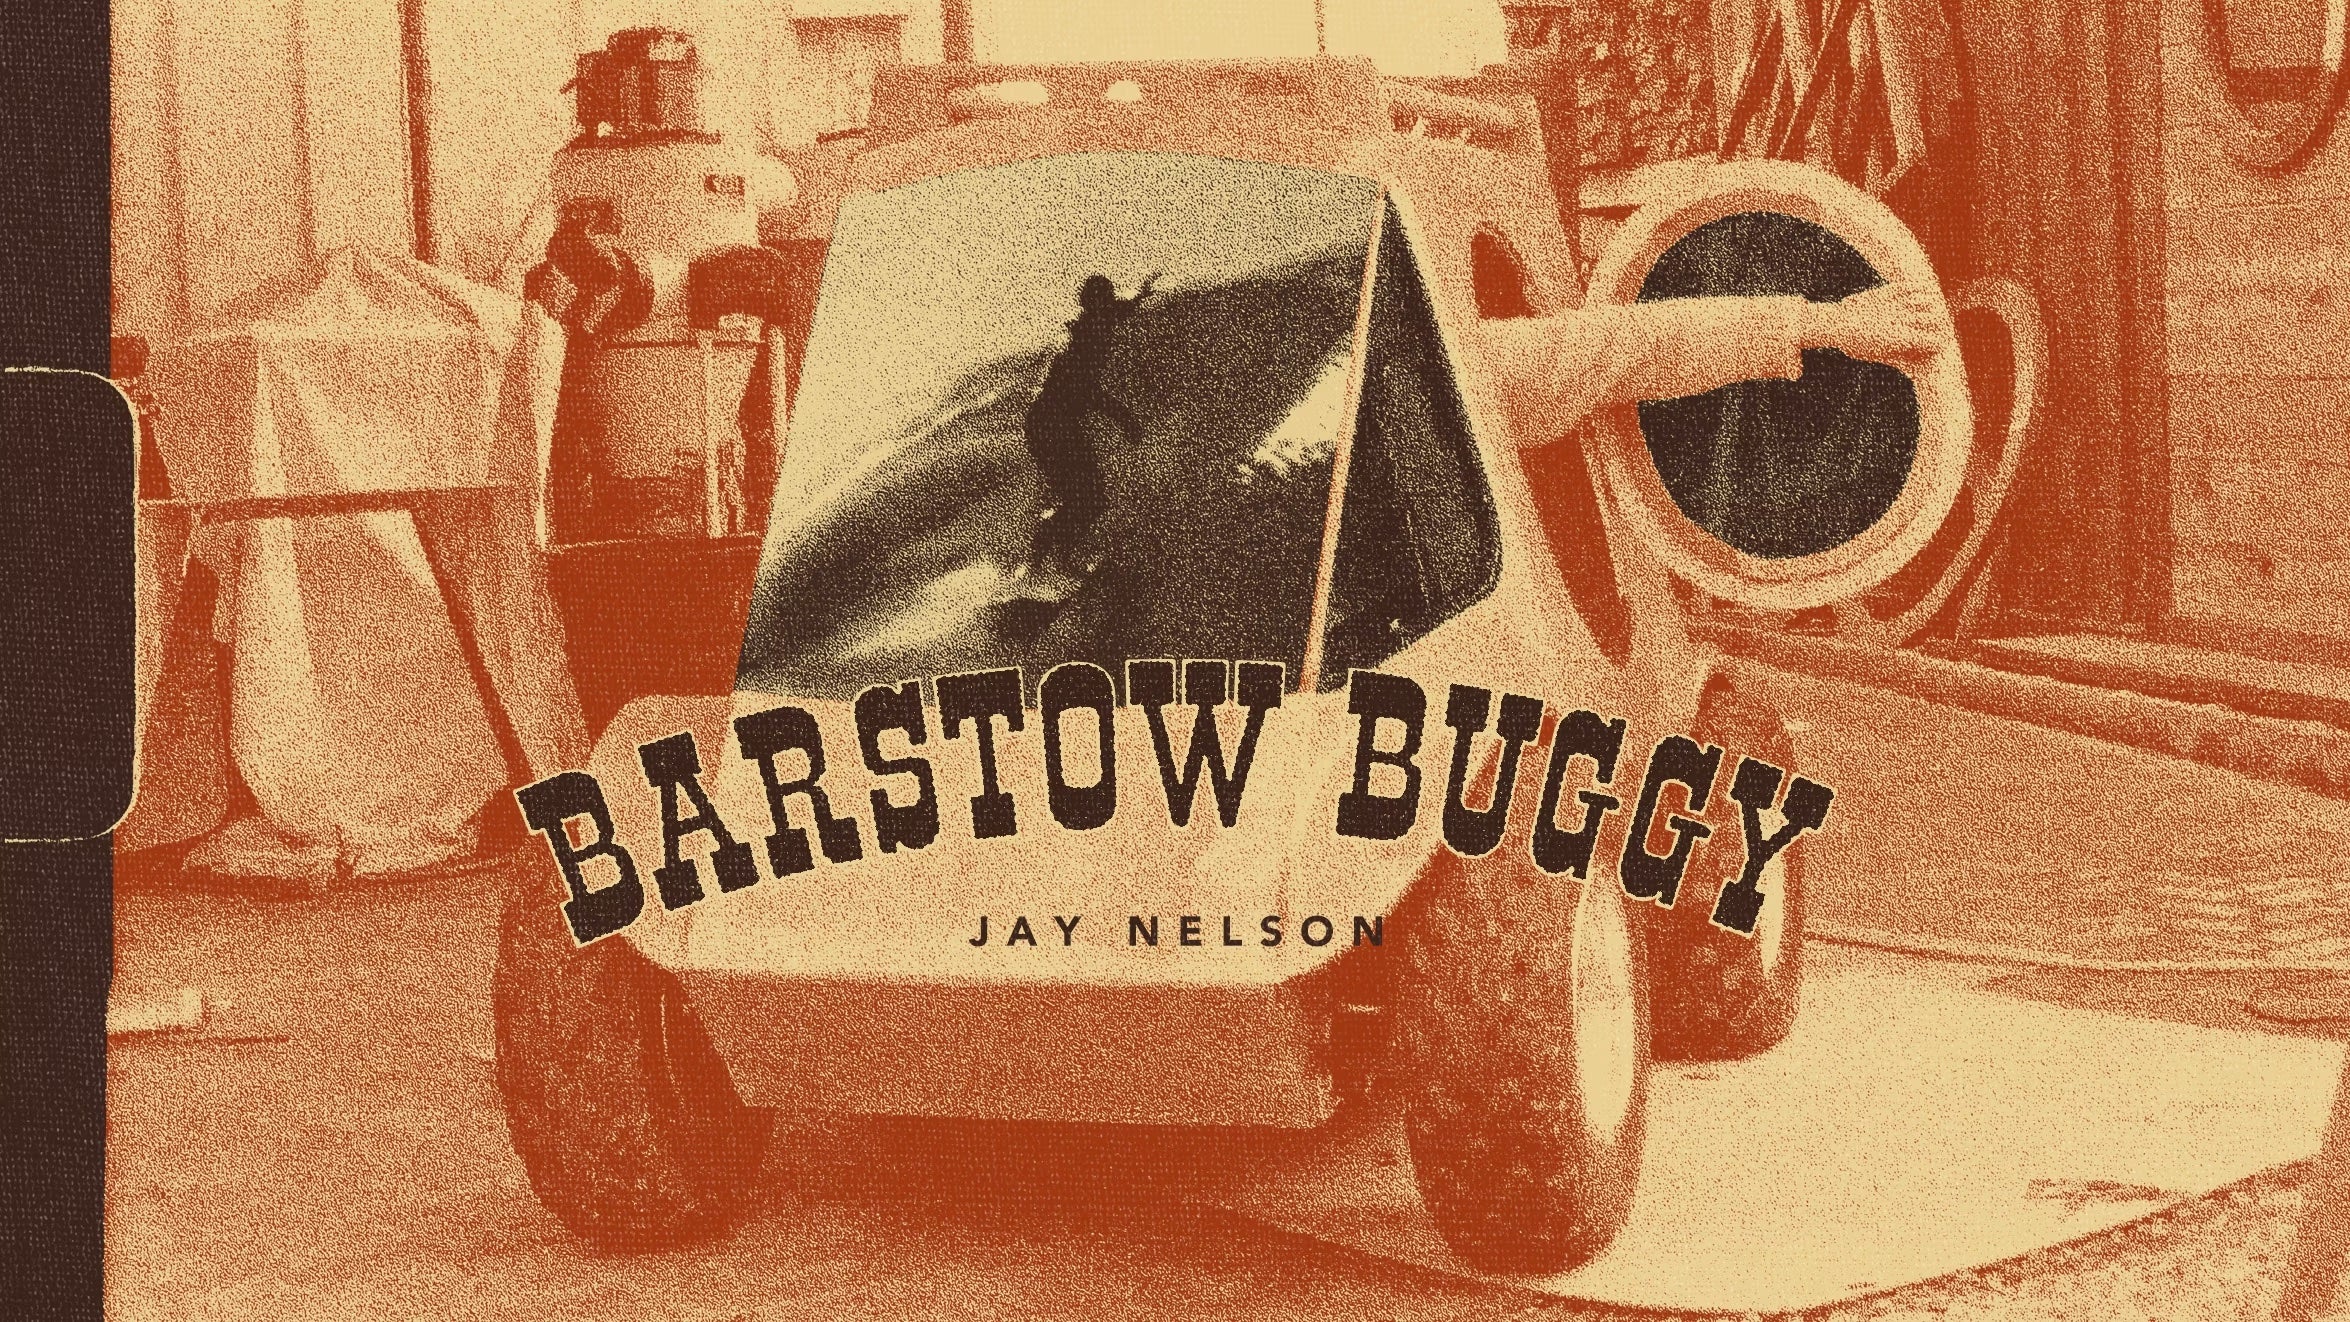 Barstow Buggy - Jay Nelson